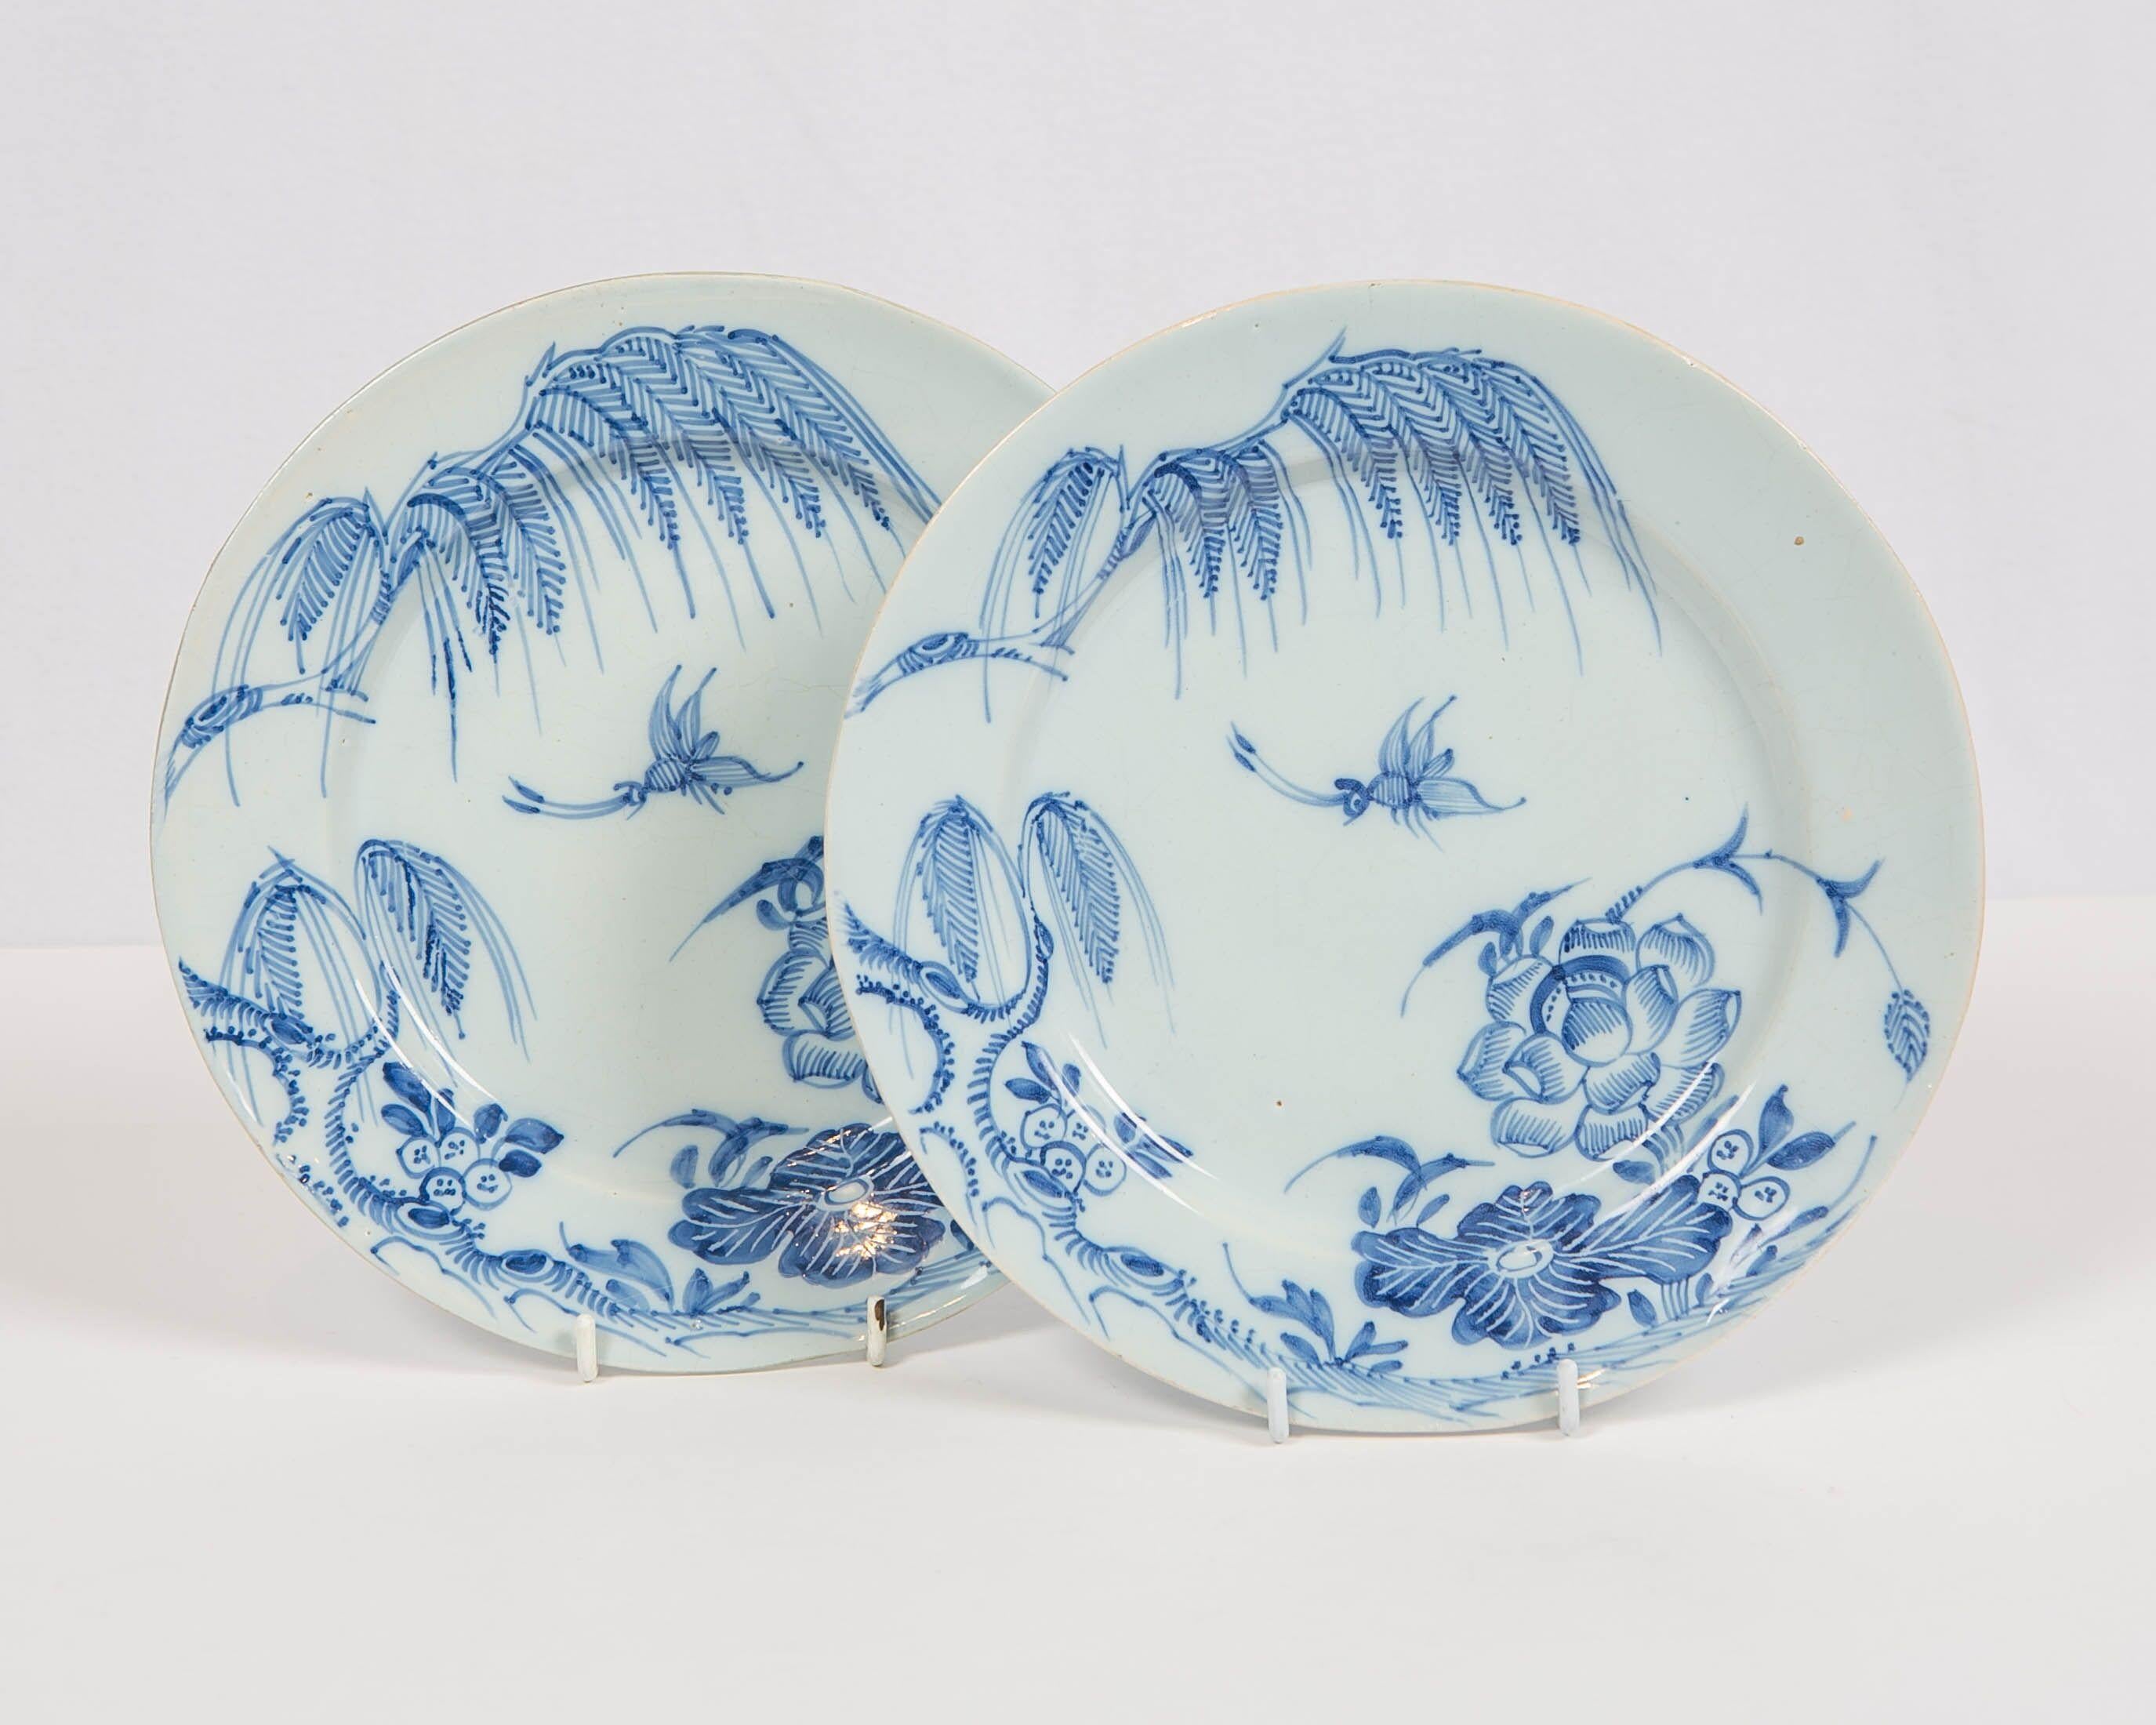 Hand-Painted  Pair Blue and White Delft Plates 18th Century, Made circa 1750